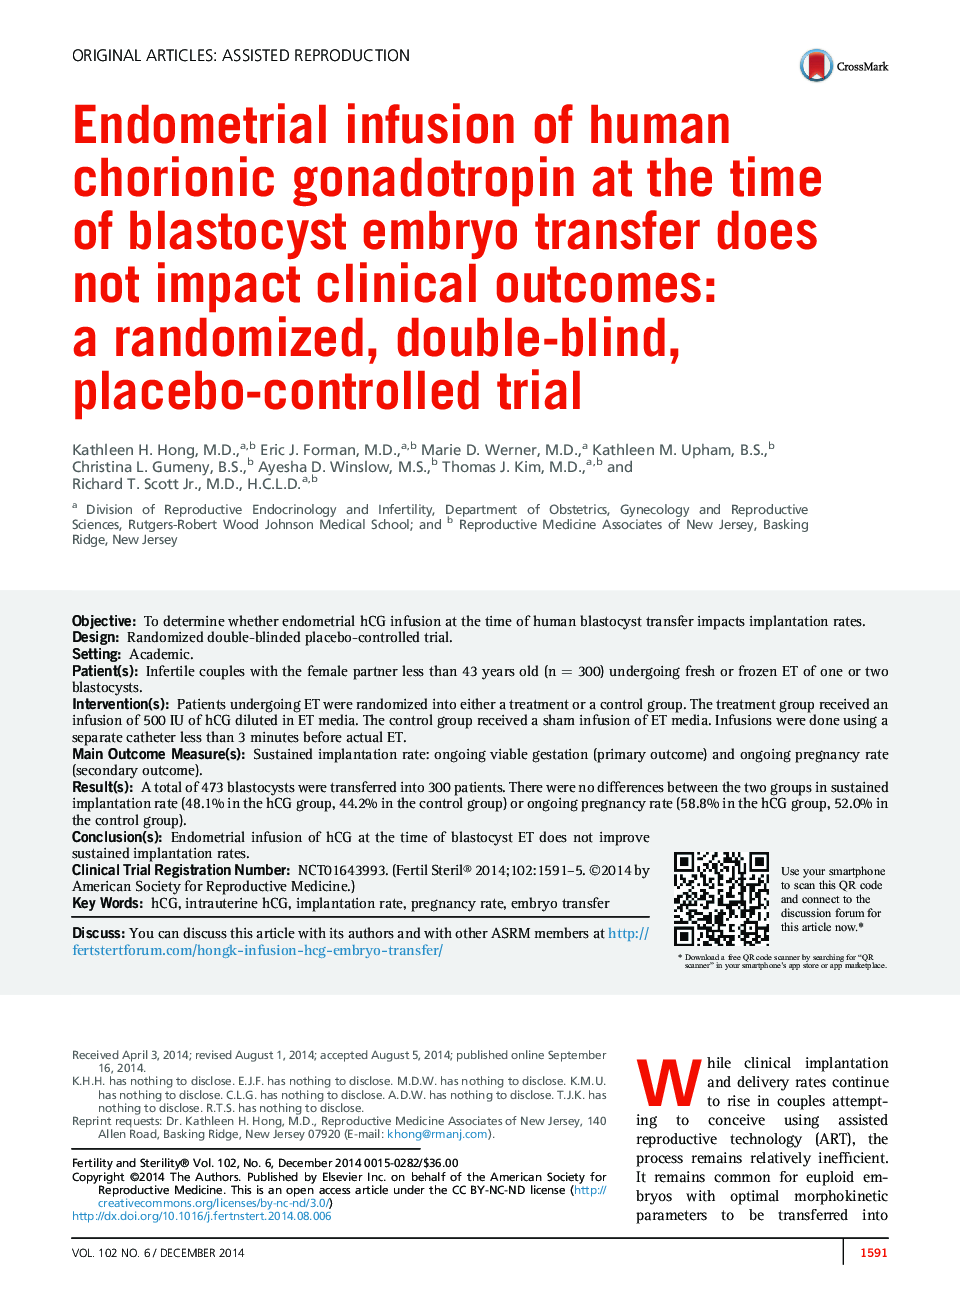 Endometrial infusion of human chorionic gonadotropin at the time ofÂ blastocyst embryo transfer does not impact clinical outcomes: aÂ randomized, double-blind, placebo-controlled trial